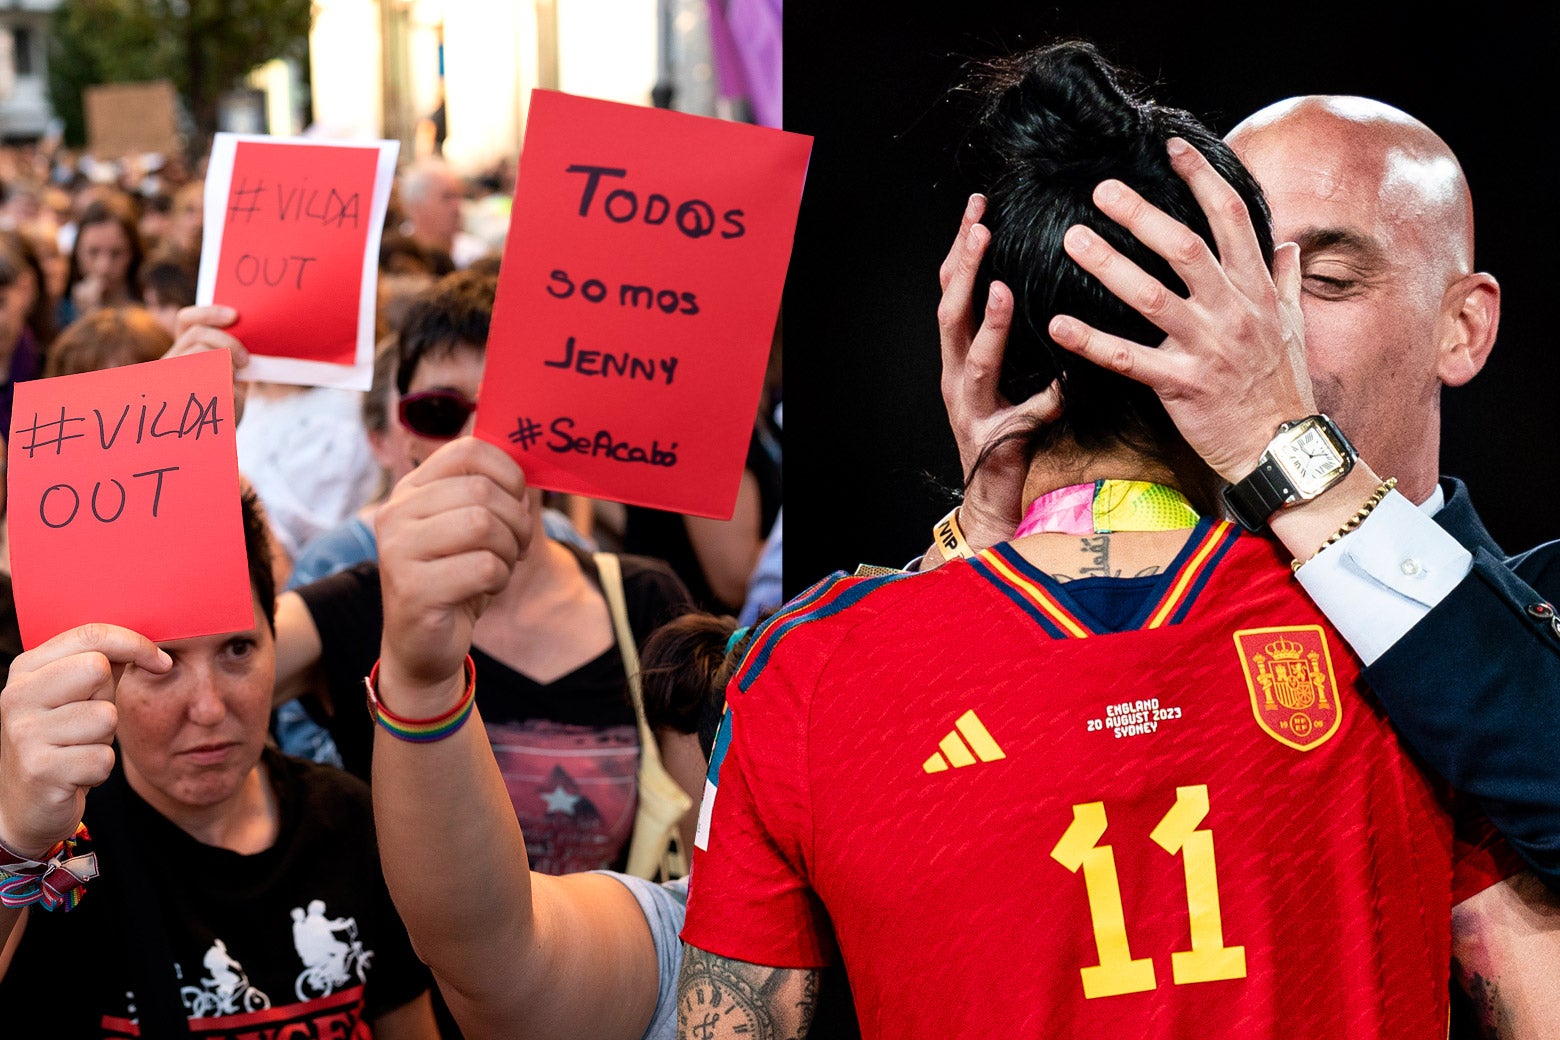 Left: Protesters hold signs reading "#VildaOut" and "Todos somos Jenny." Right: Rubiales forcibly kisses Jenni Hermoso.